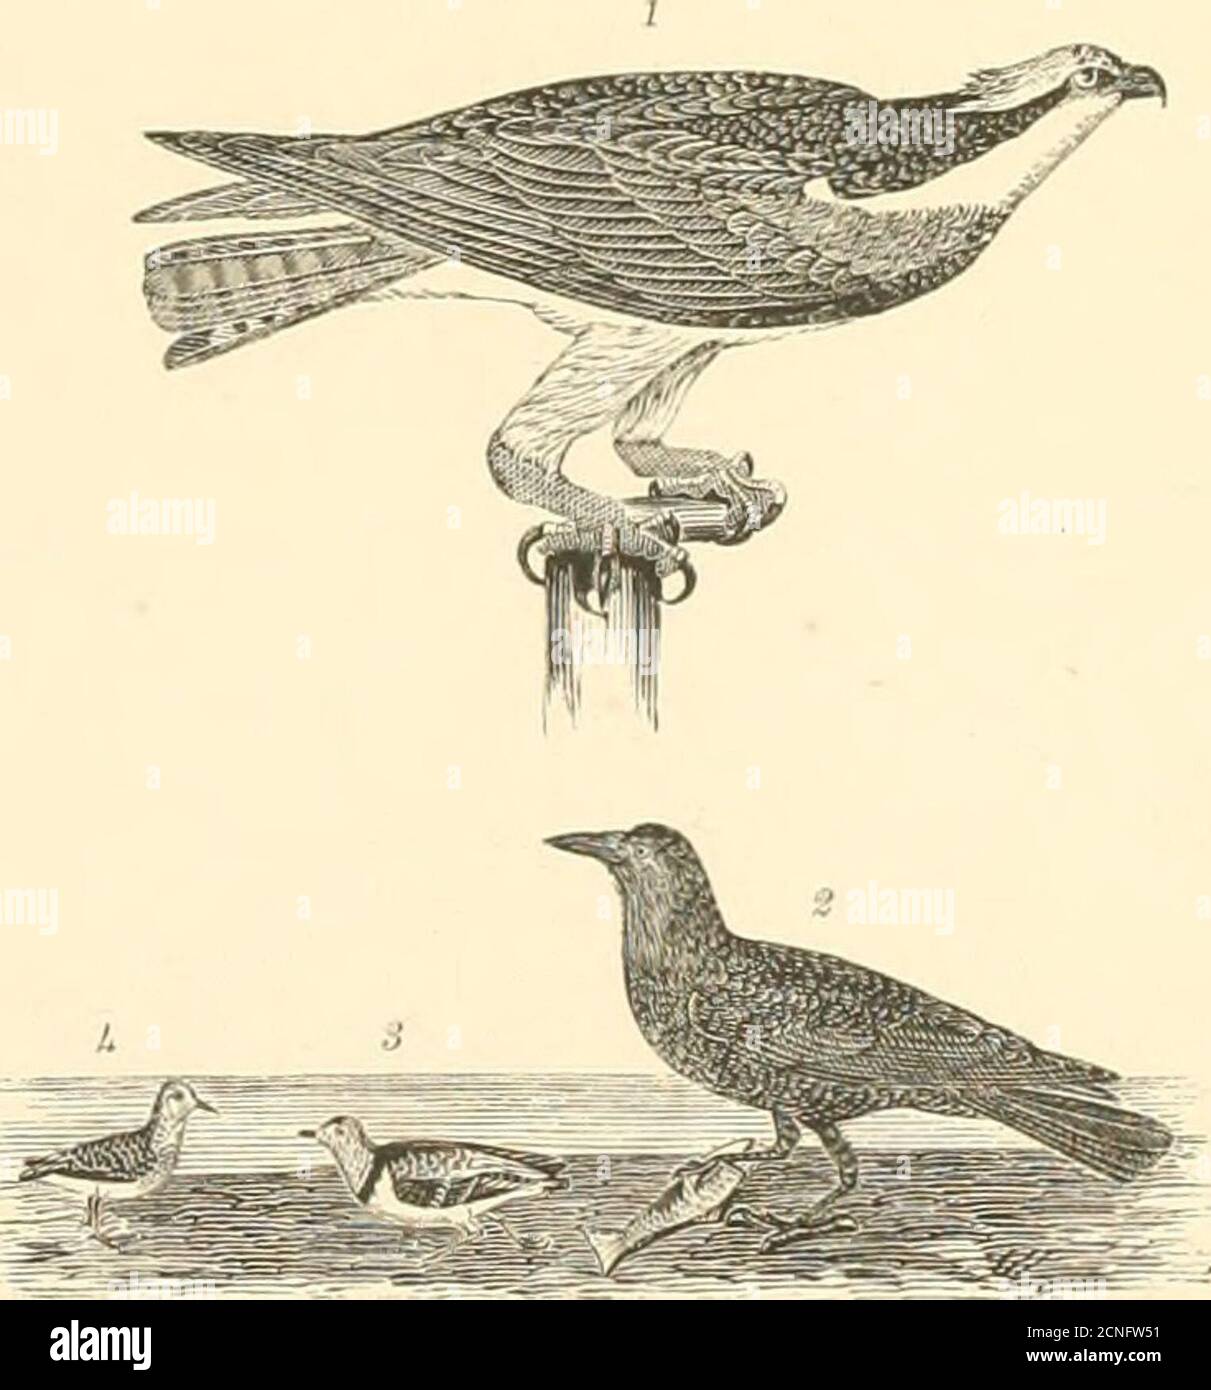 . American ornithology; or, the natural history of the birds of the United States . ILATE 35.—1. Miuter Falcou. 2. Magpie. 3. Crow, Plate 37.-1. Fish-hawk 2. Fish-crow. 3. Ring Plover.4. Lea^t Snipt^ Stock Photo